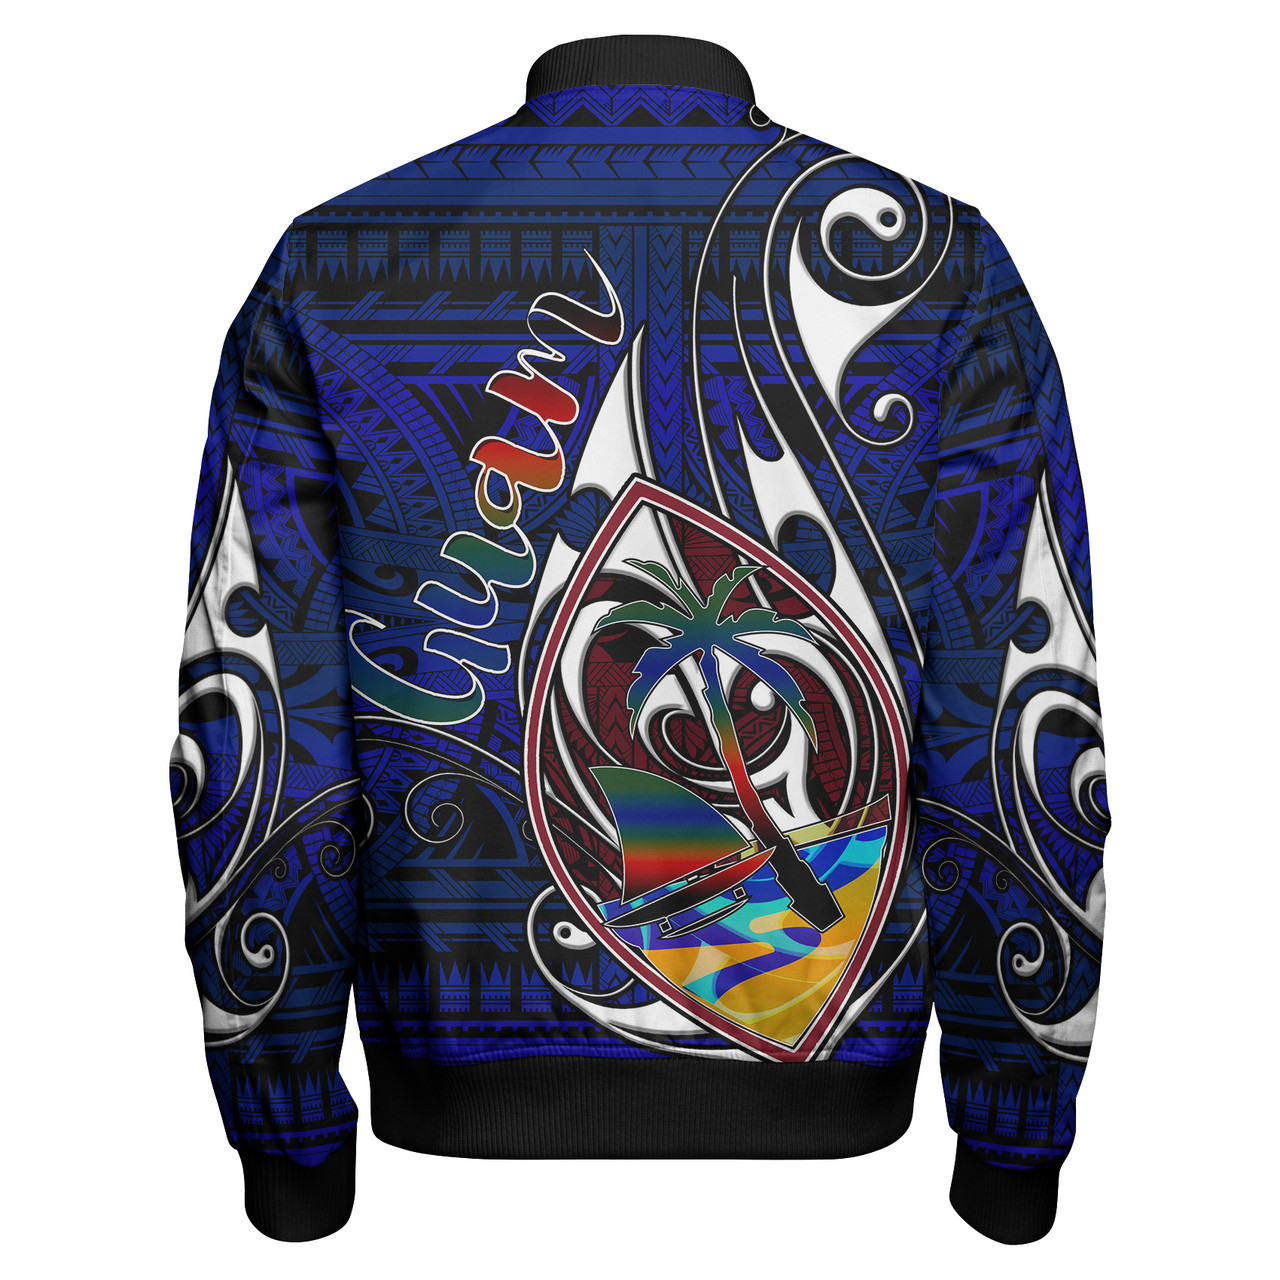 Guam Bomber Jacket - Guam Independence Day With Hook Polynesian Patterns